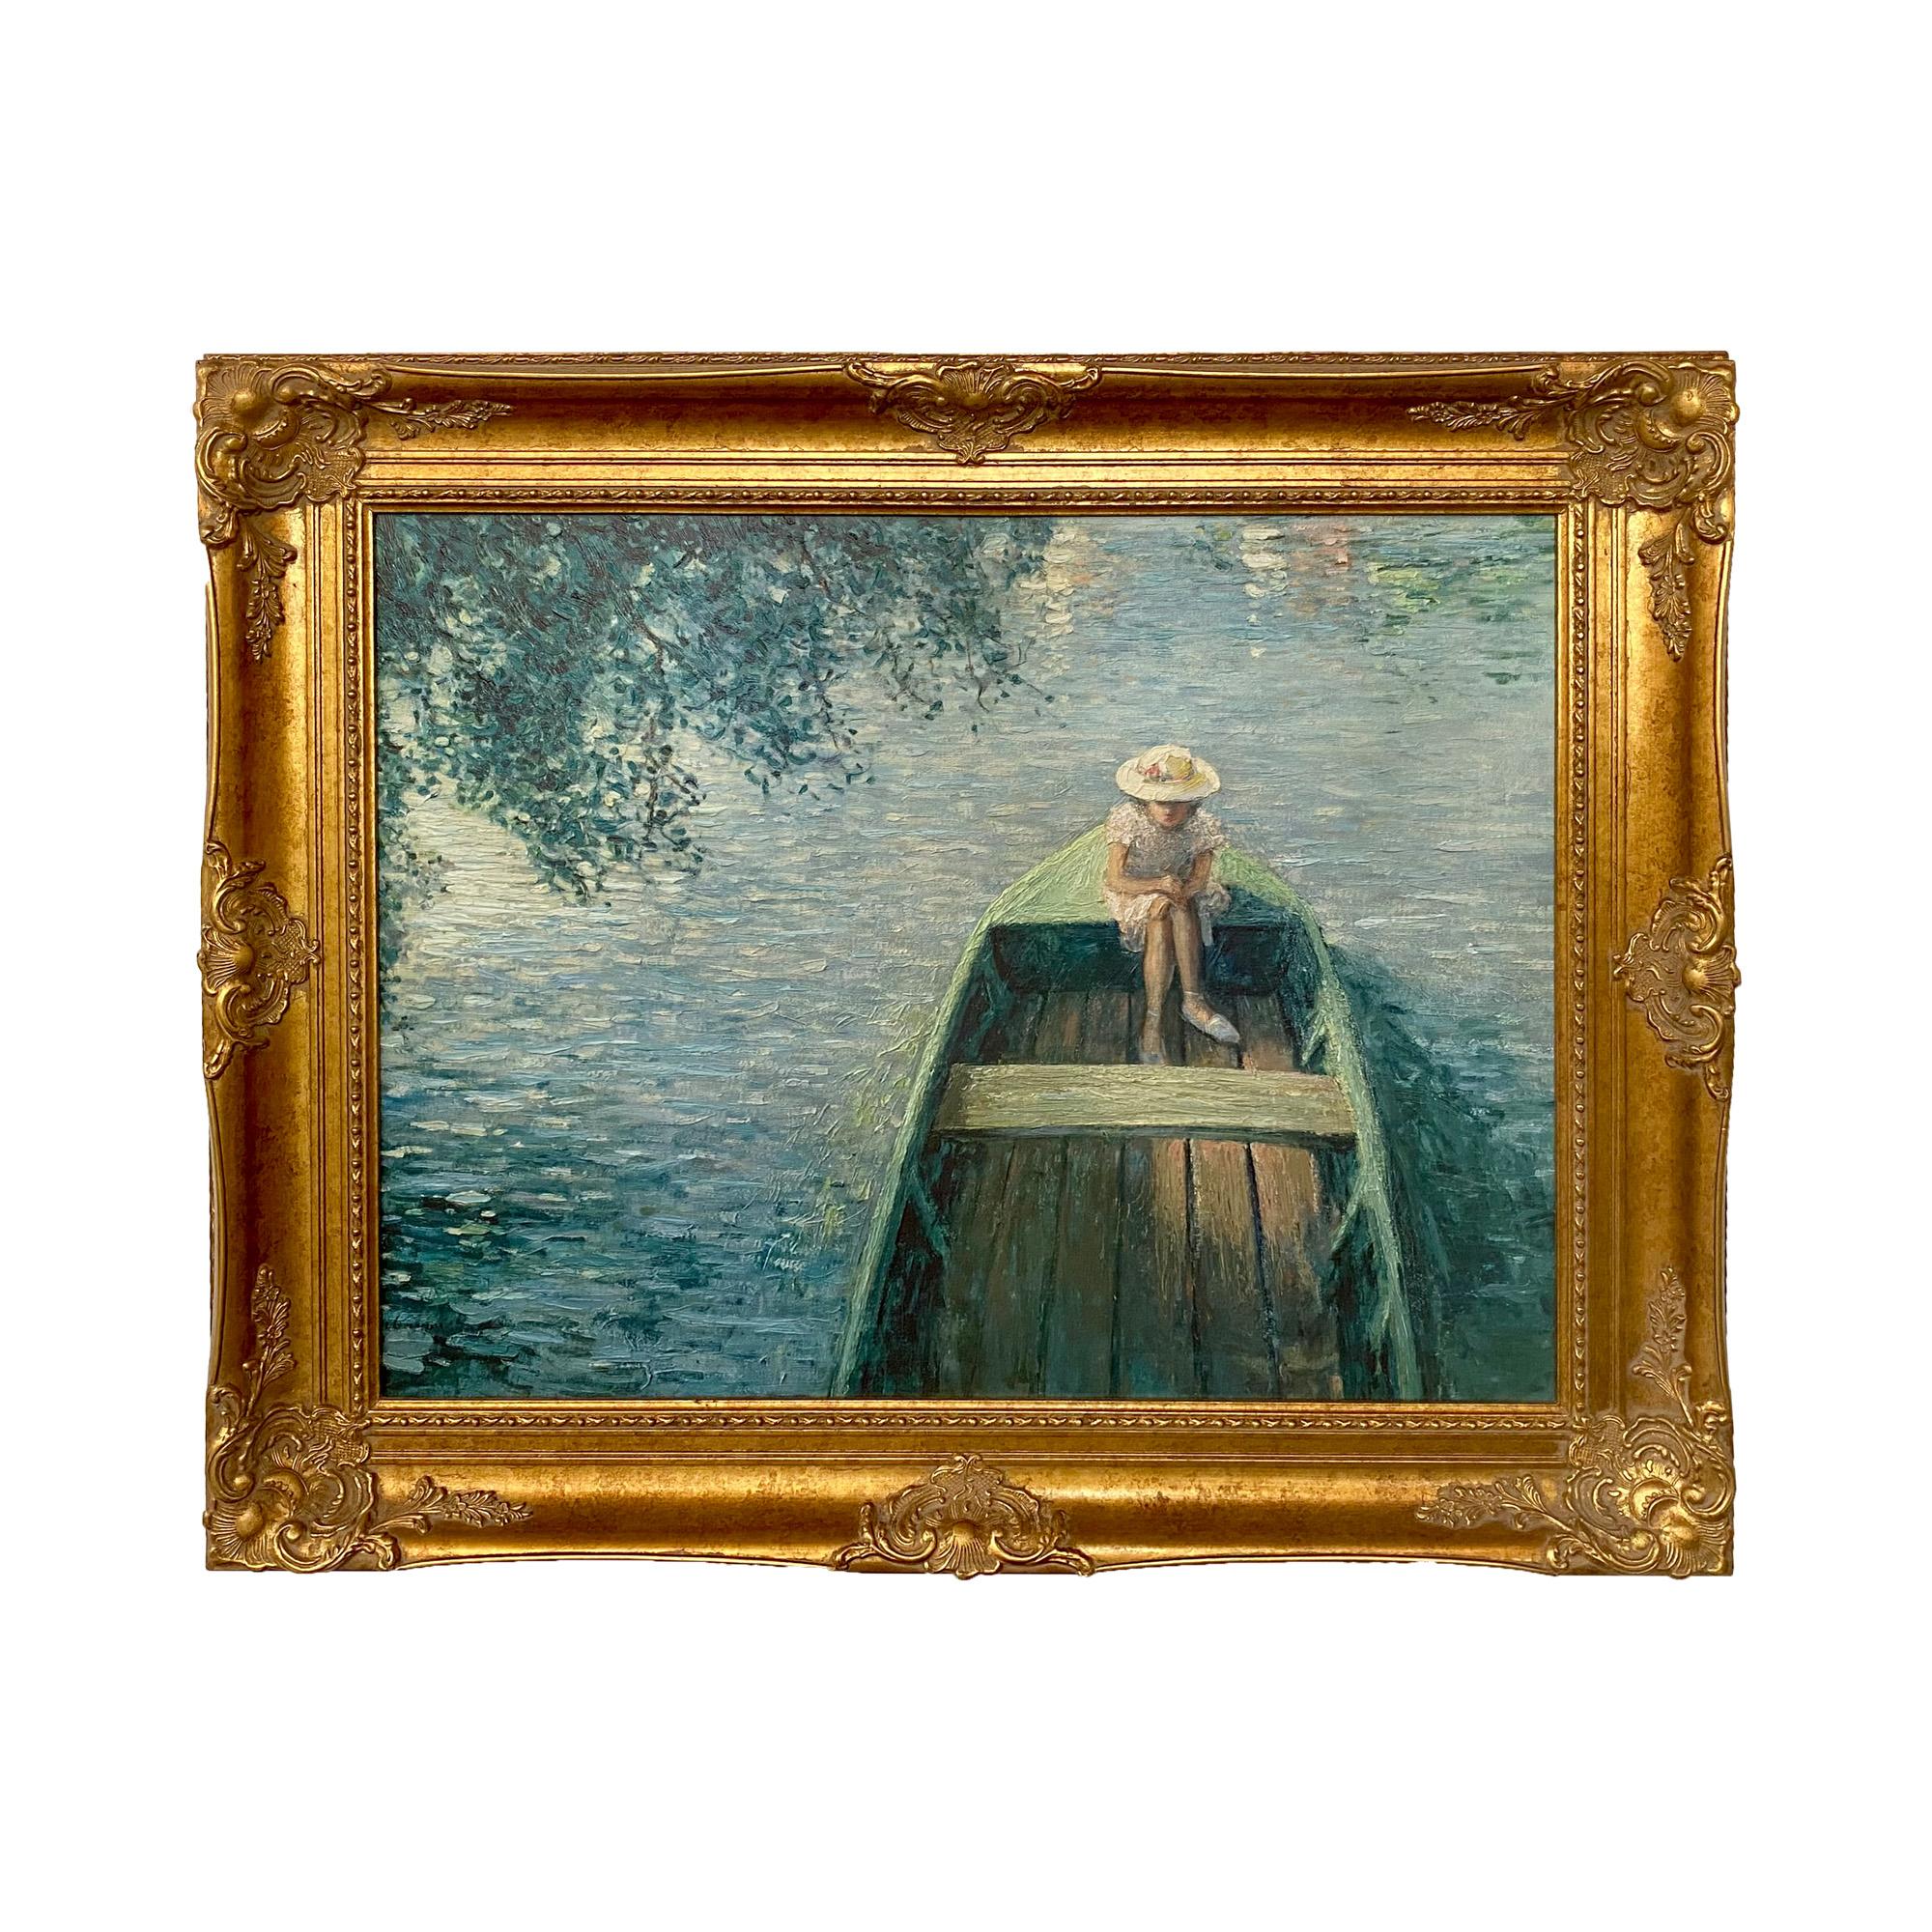 An enchanting print on canvas inspired by The French post-impressionistic Henri le Basque (French 1865 - 1937), a serene tableau unfolds along the picturesque banks of the French River La Marne. The central figure, a young girl adorned in an elegant